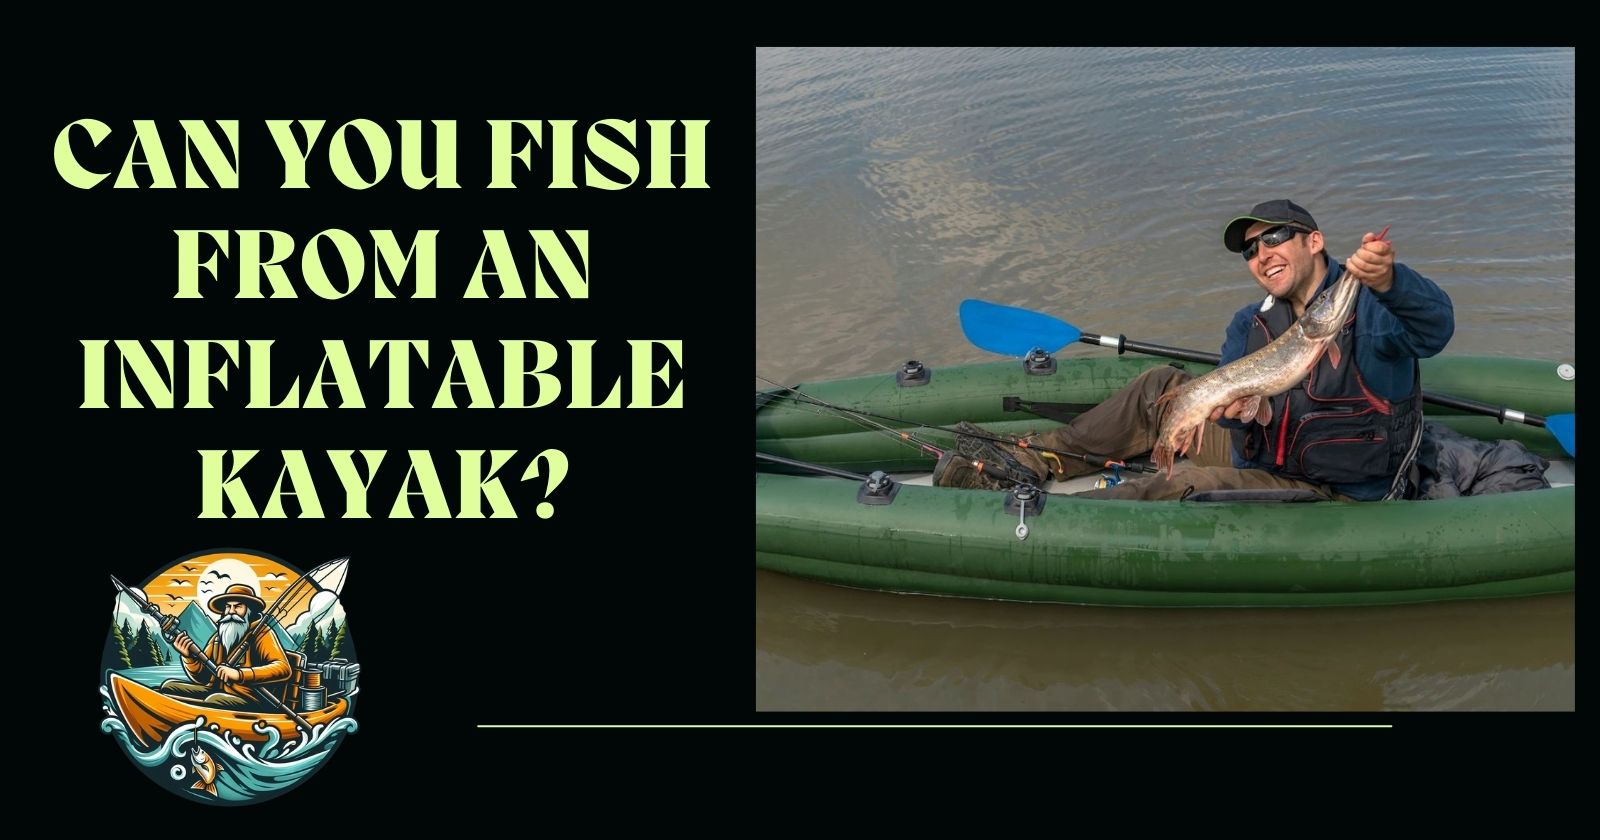 Can You Fish From an Inflatable kayak